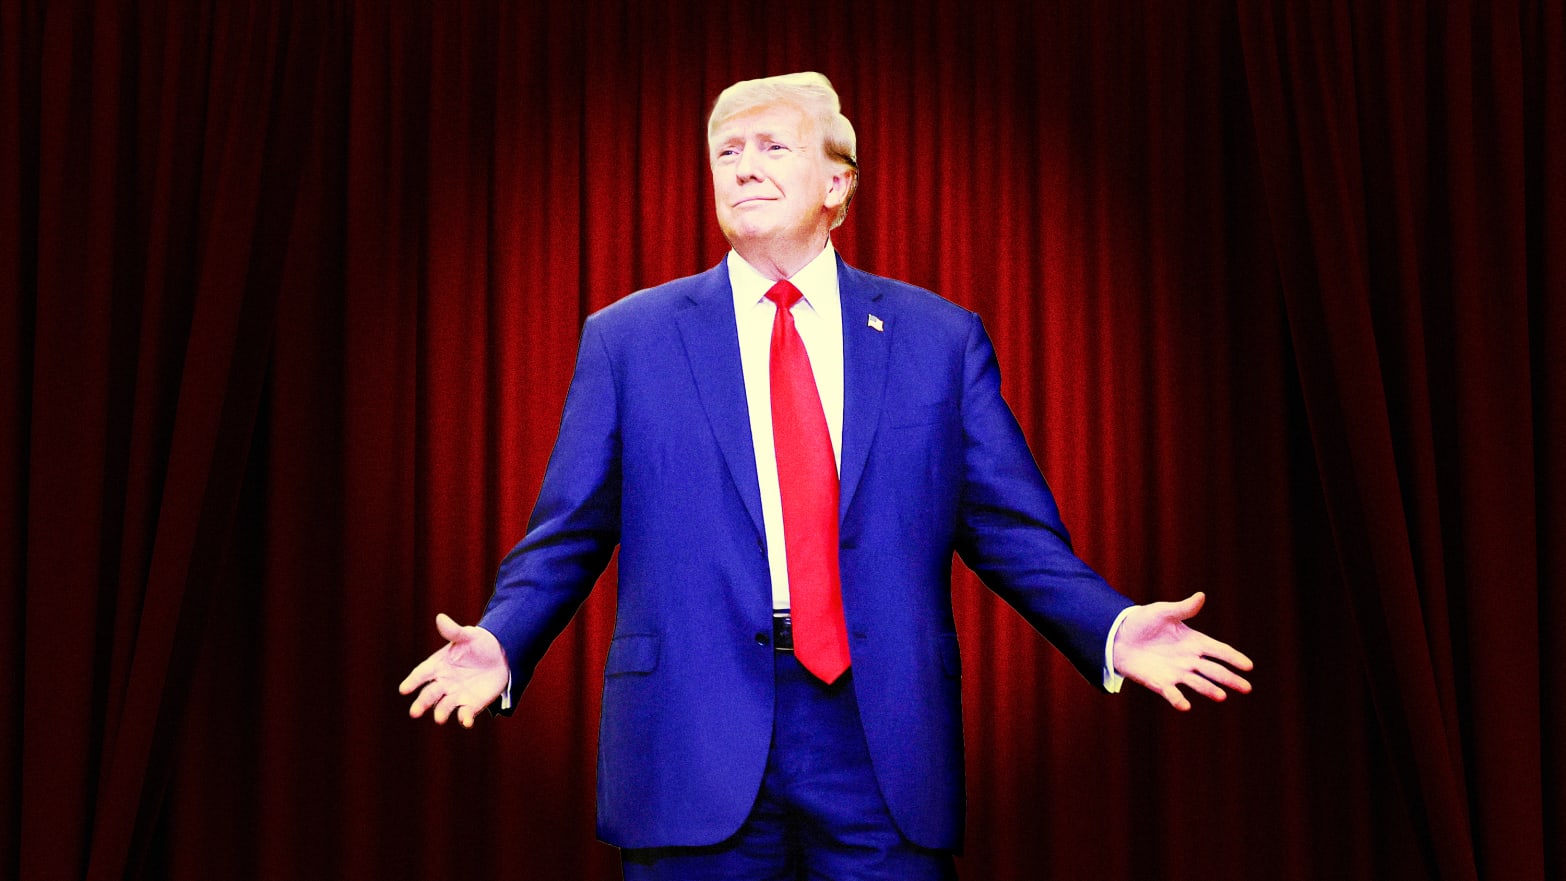 A photo illustration of Donald Trump on stage.